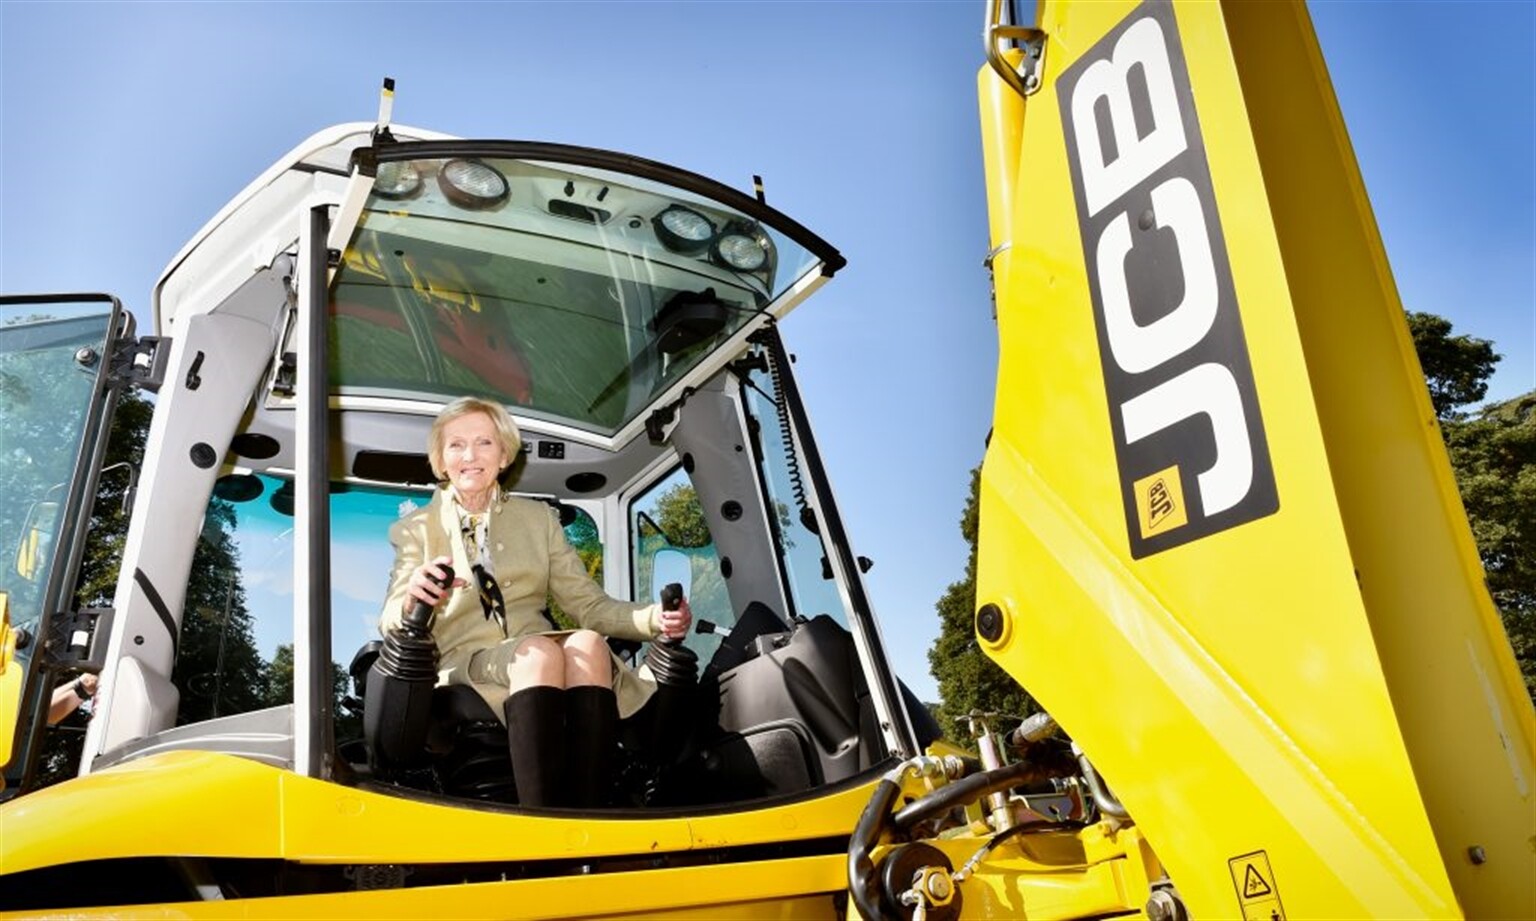 JCB Backhoe controls are a piece of cake for Mary Berry